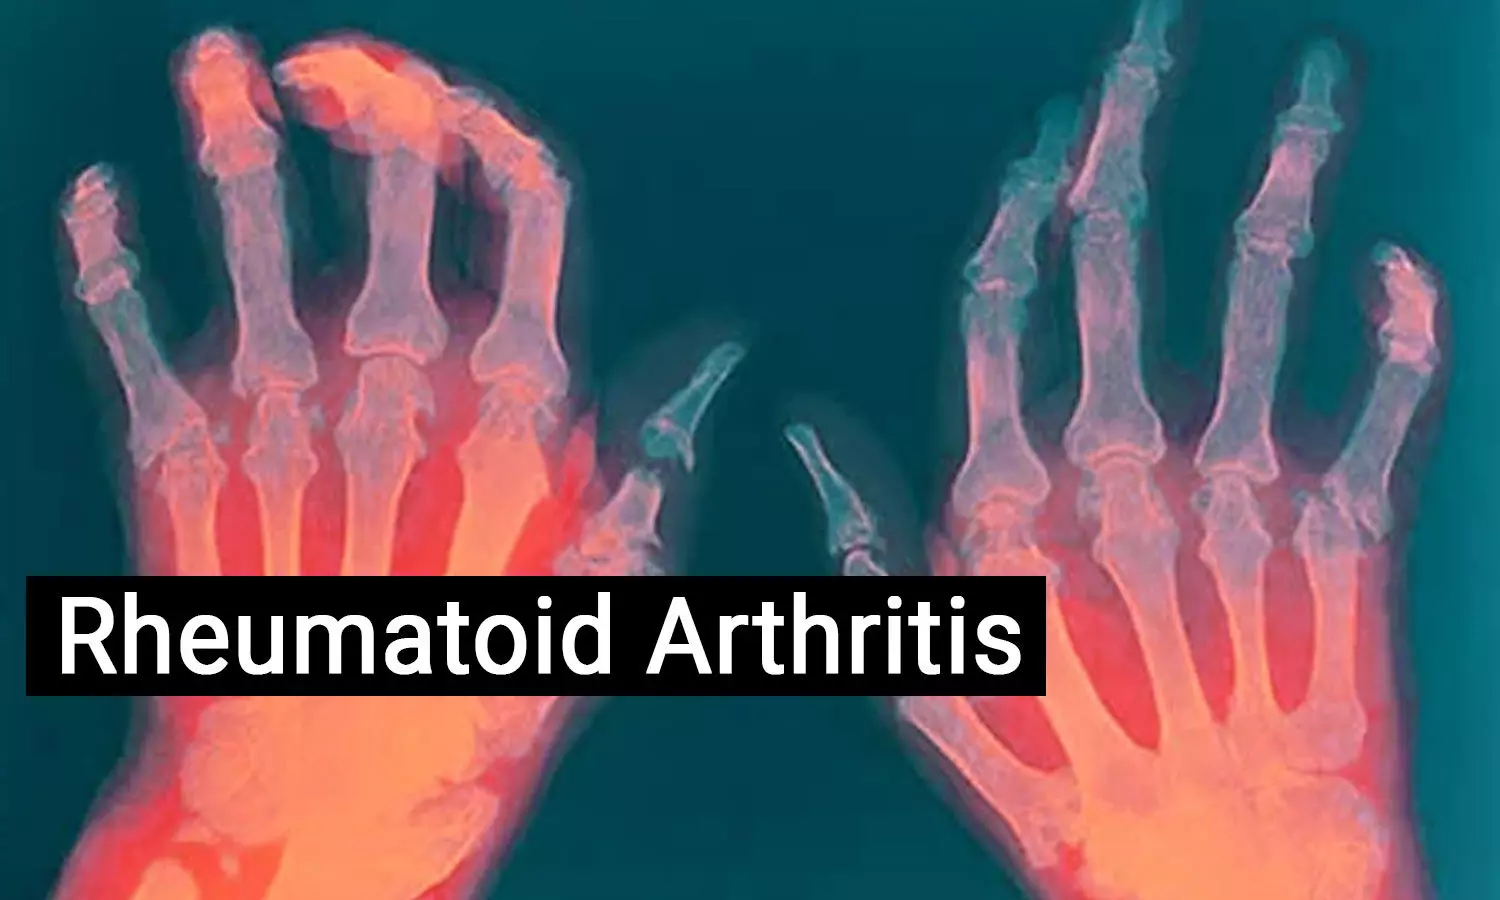 New radiotracer safe and effective for imaging early rheumatoid arthritis